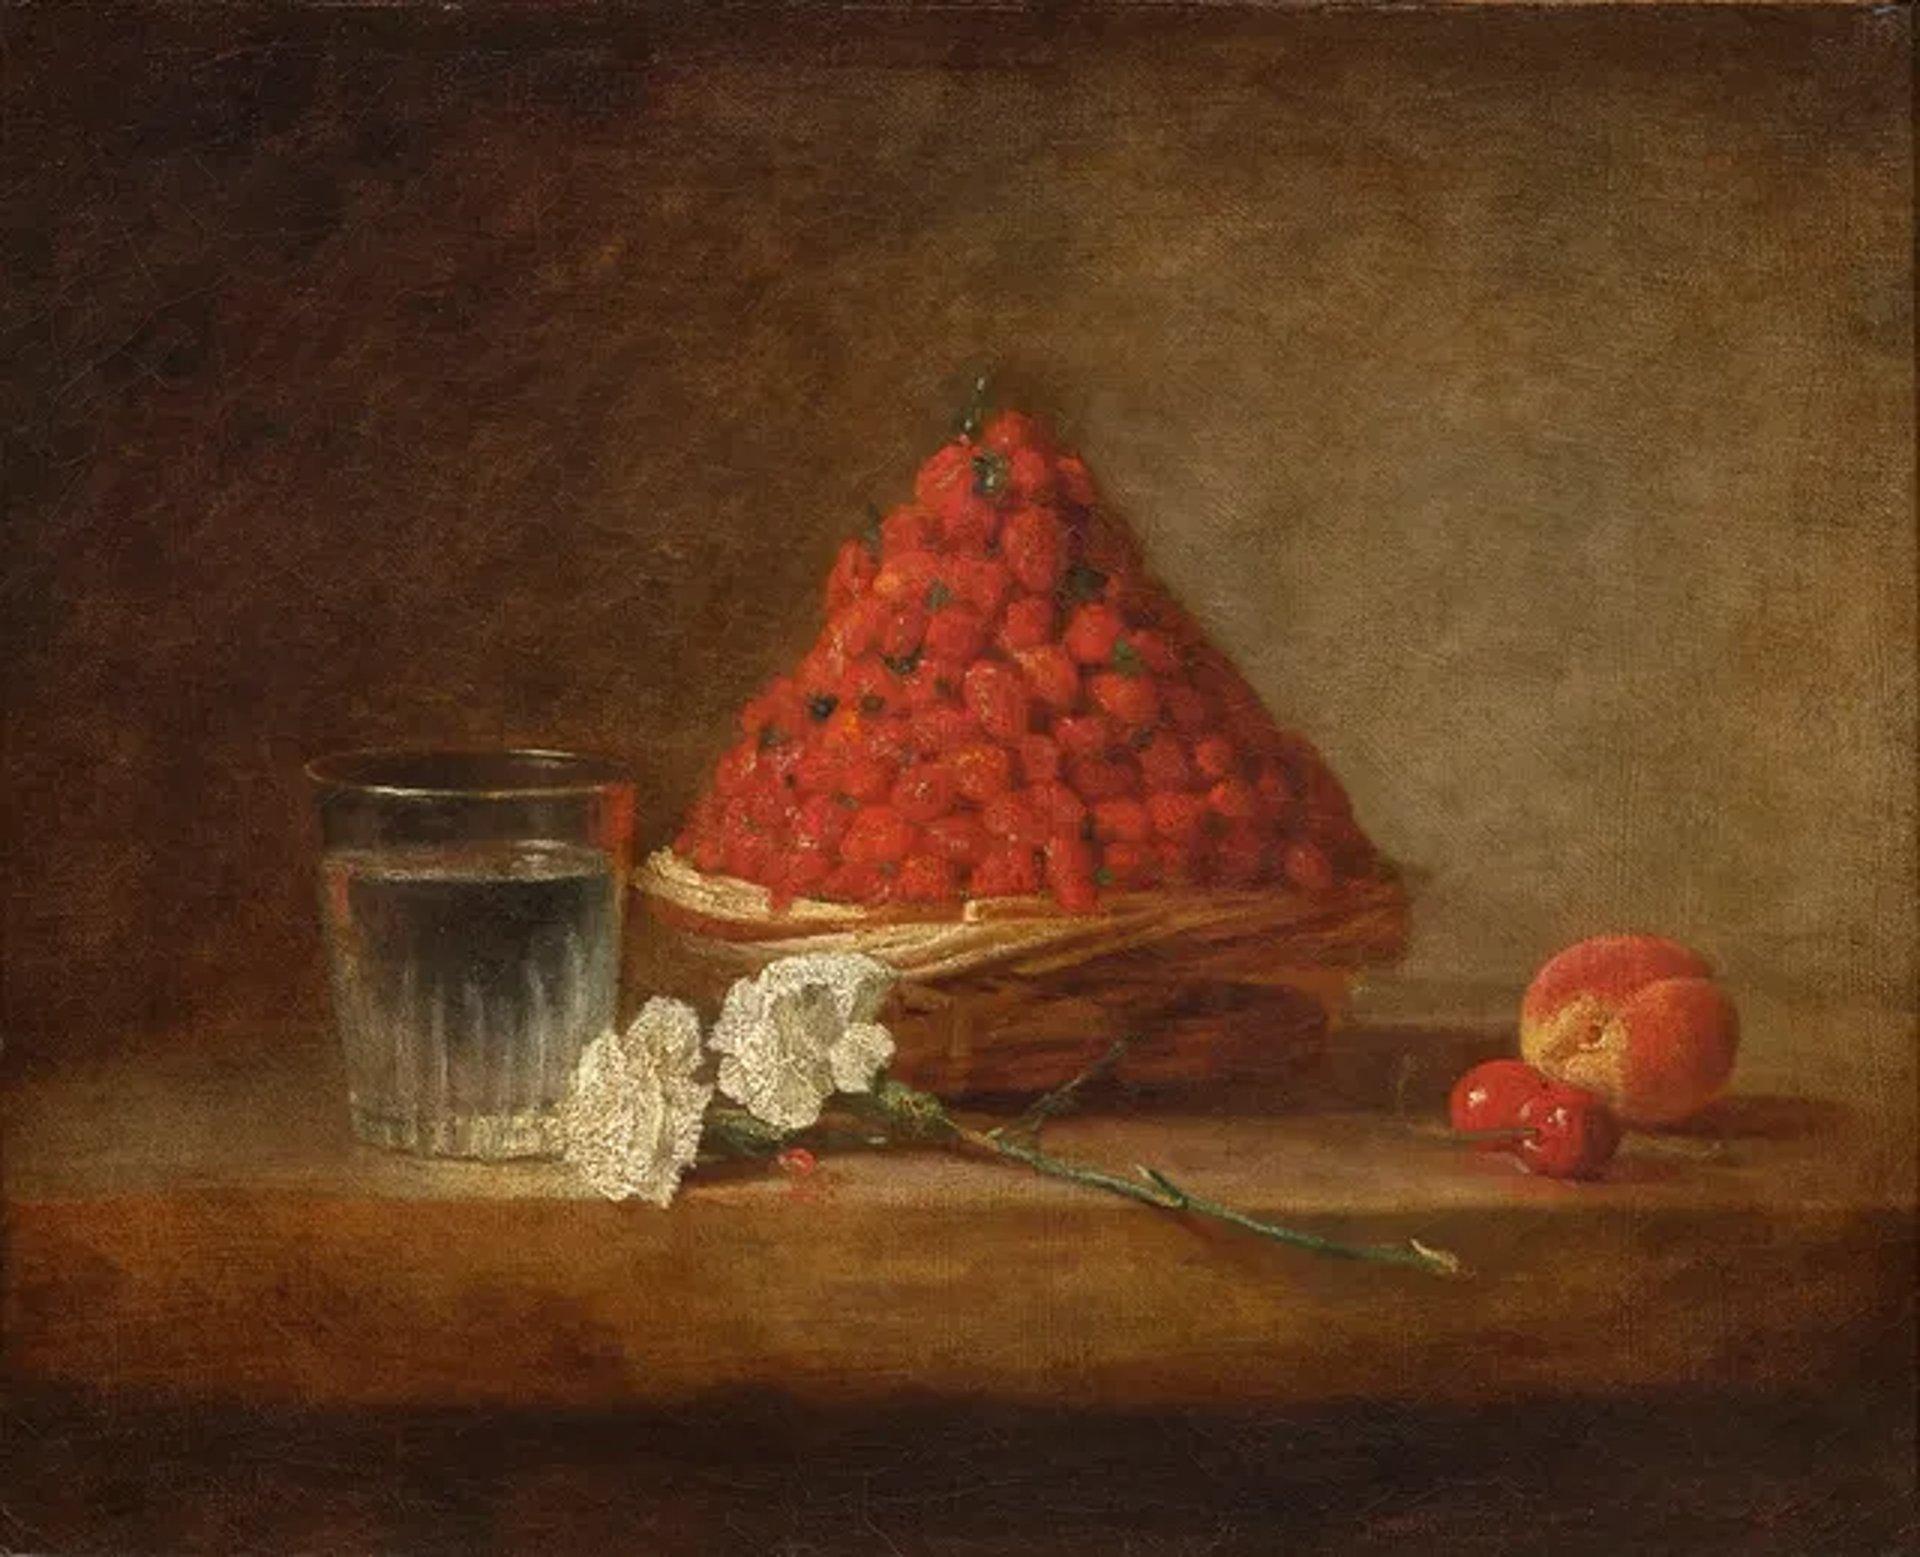 Photograph of painting “The Basket of Wild Strawberries” by artist Jean Siméon Chardin